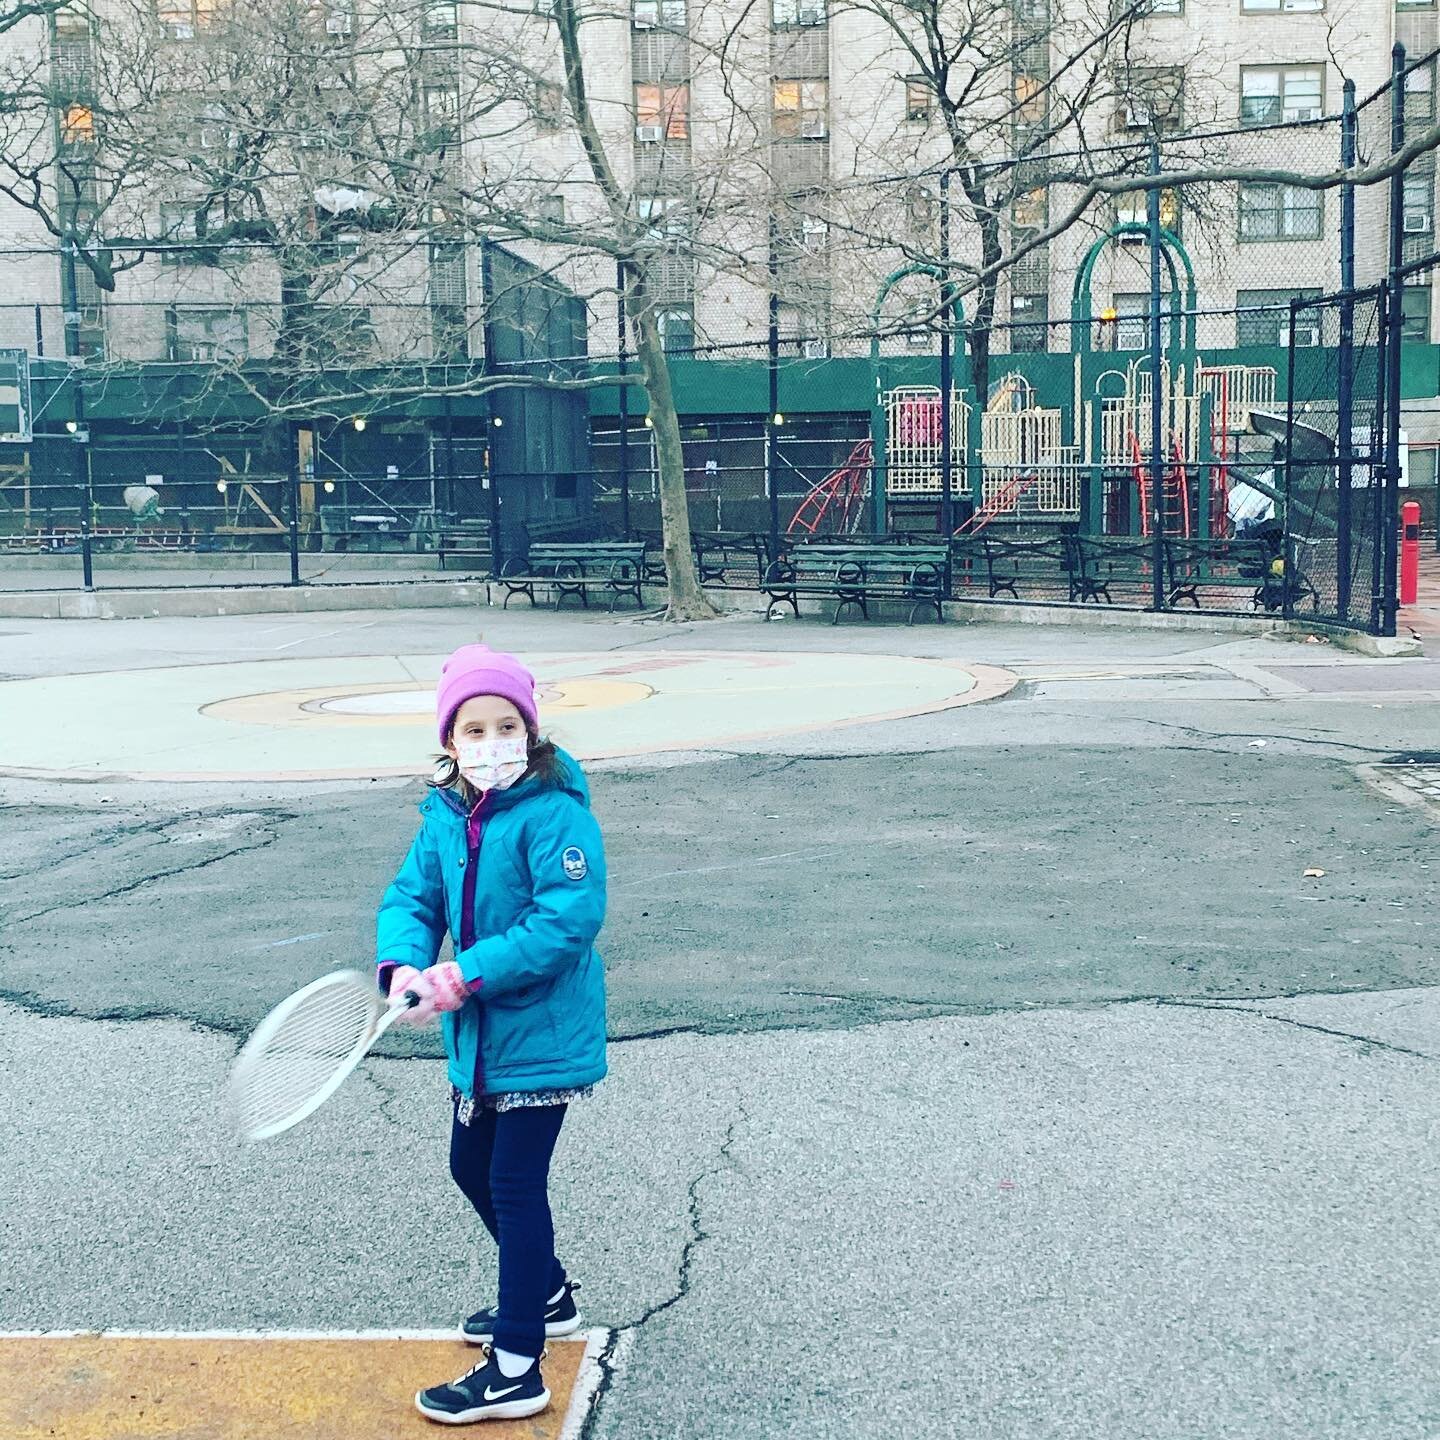 The cold isn&rsquo;t stopping us! Playing tennis improves your immune system! #uws #uwskids #solbloom #upperwestside #upperwestsidenyc #kids #afterschoolactivitiesforkids #kidsactivities #kidsactivitiesuws Link in bio to sign up